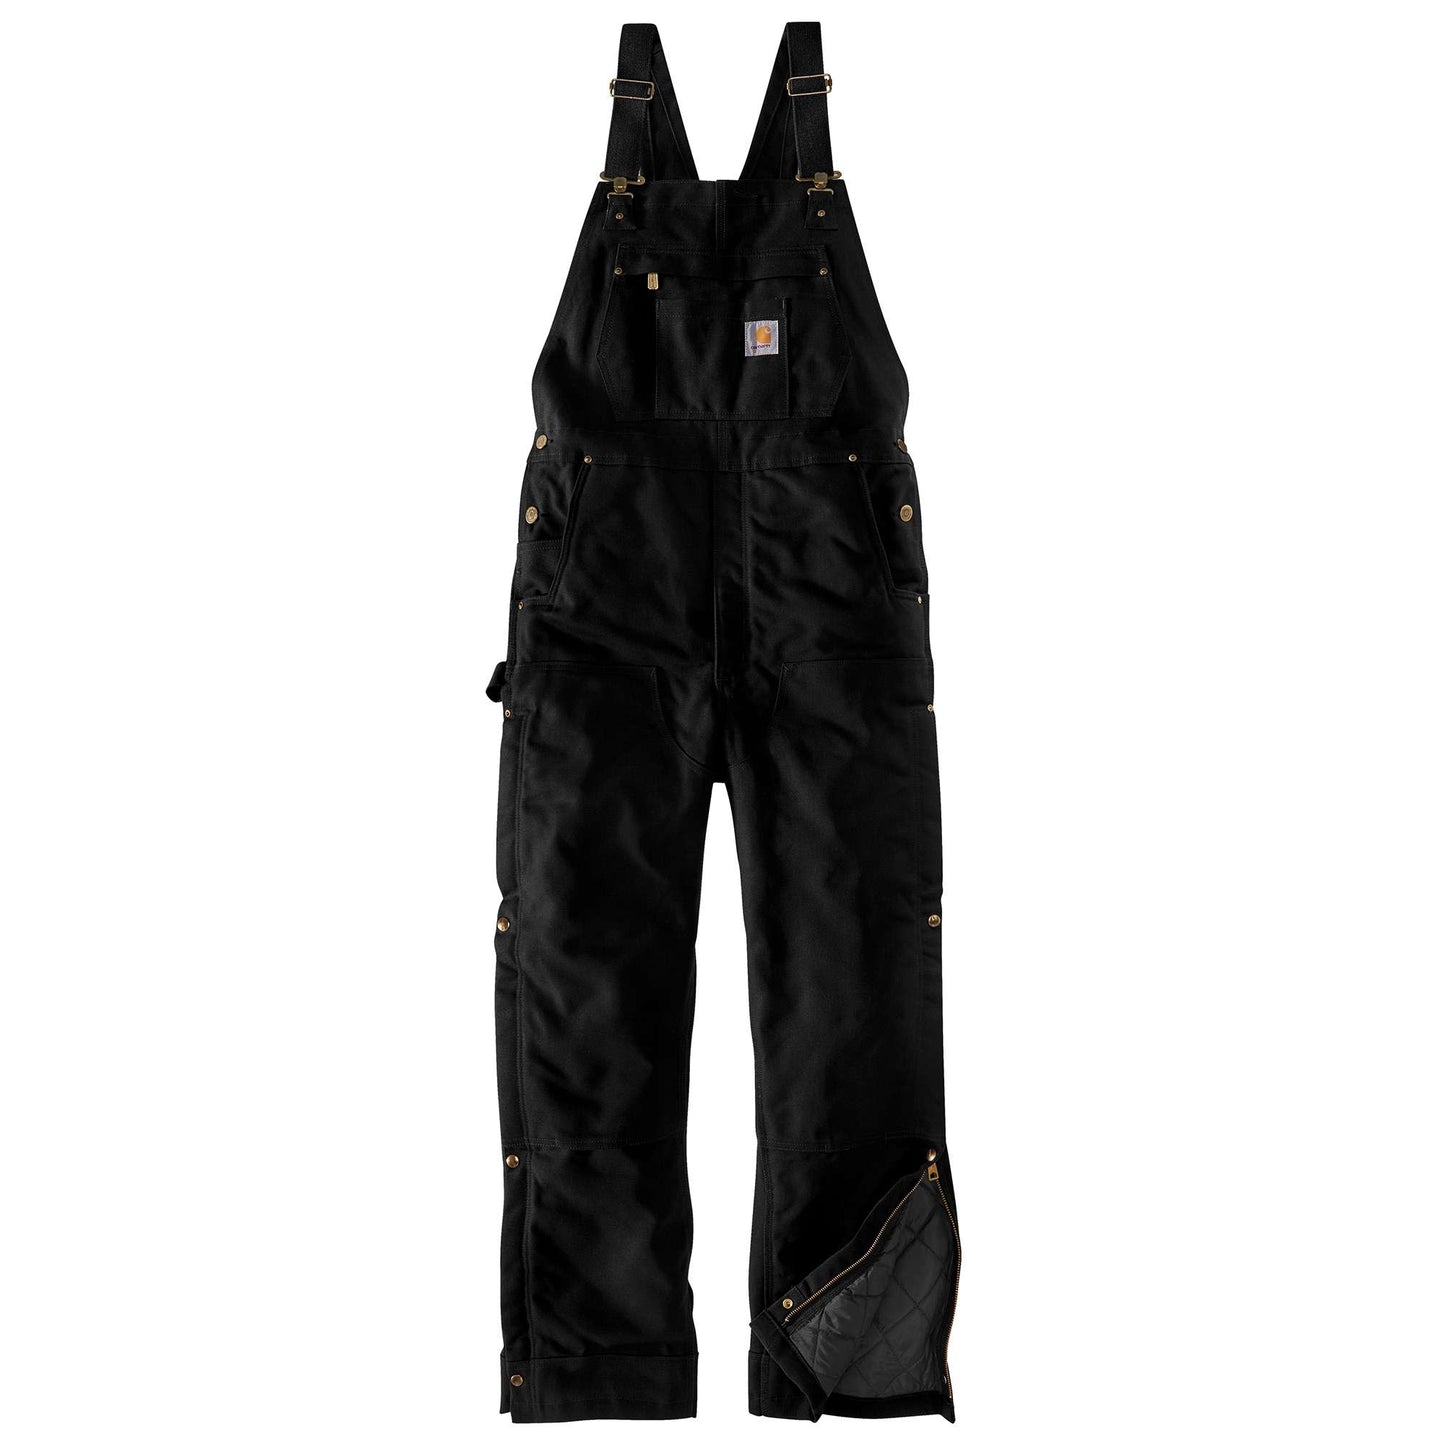 Loose Fit Firm Duck Insulated Bib Overall